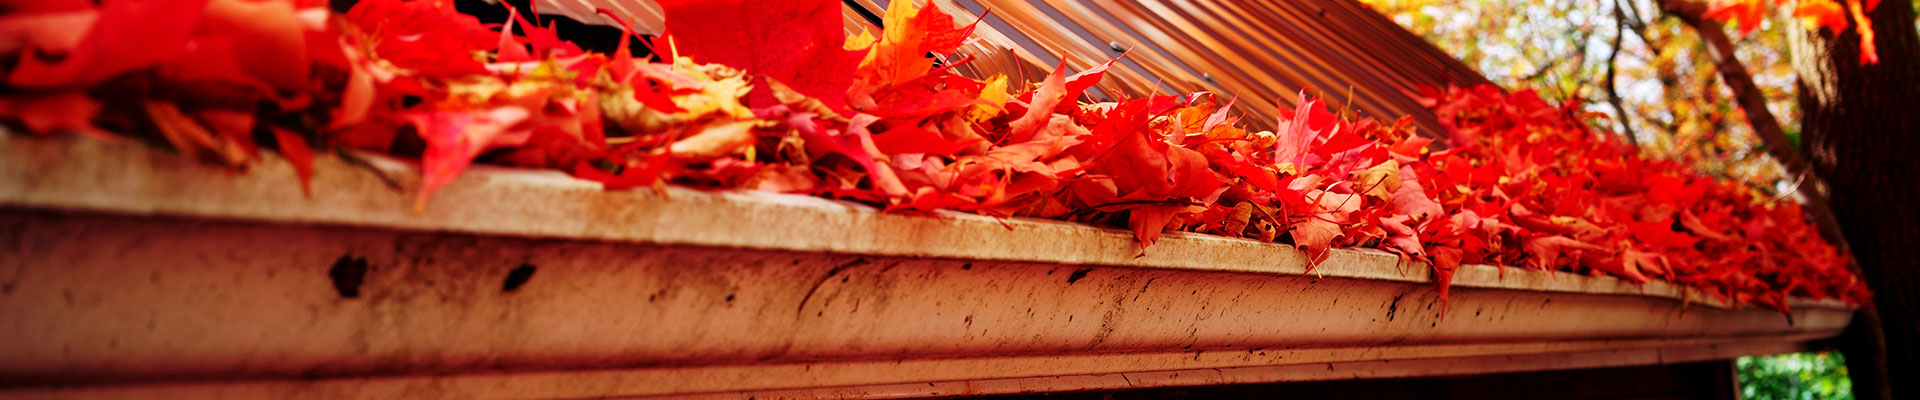 rain gutter with fall leaves 